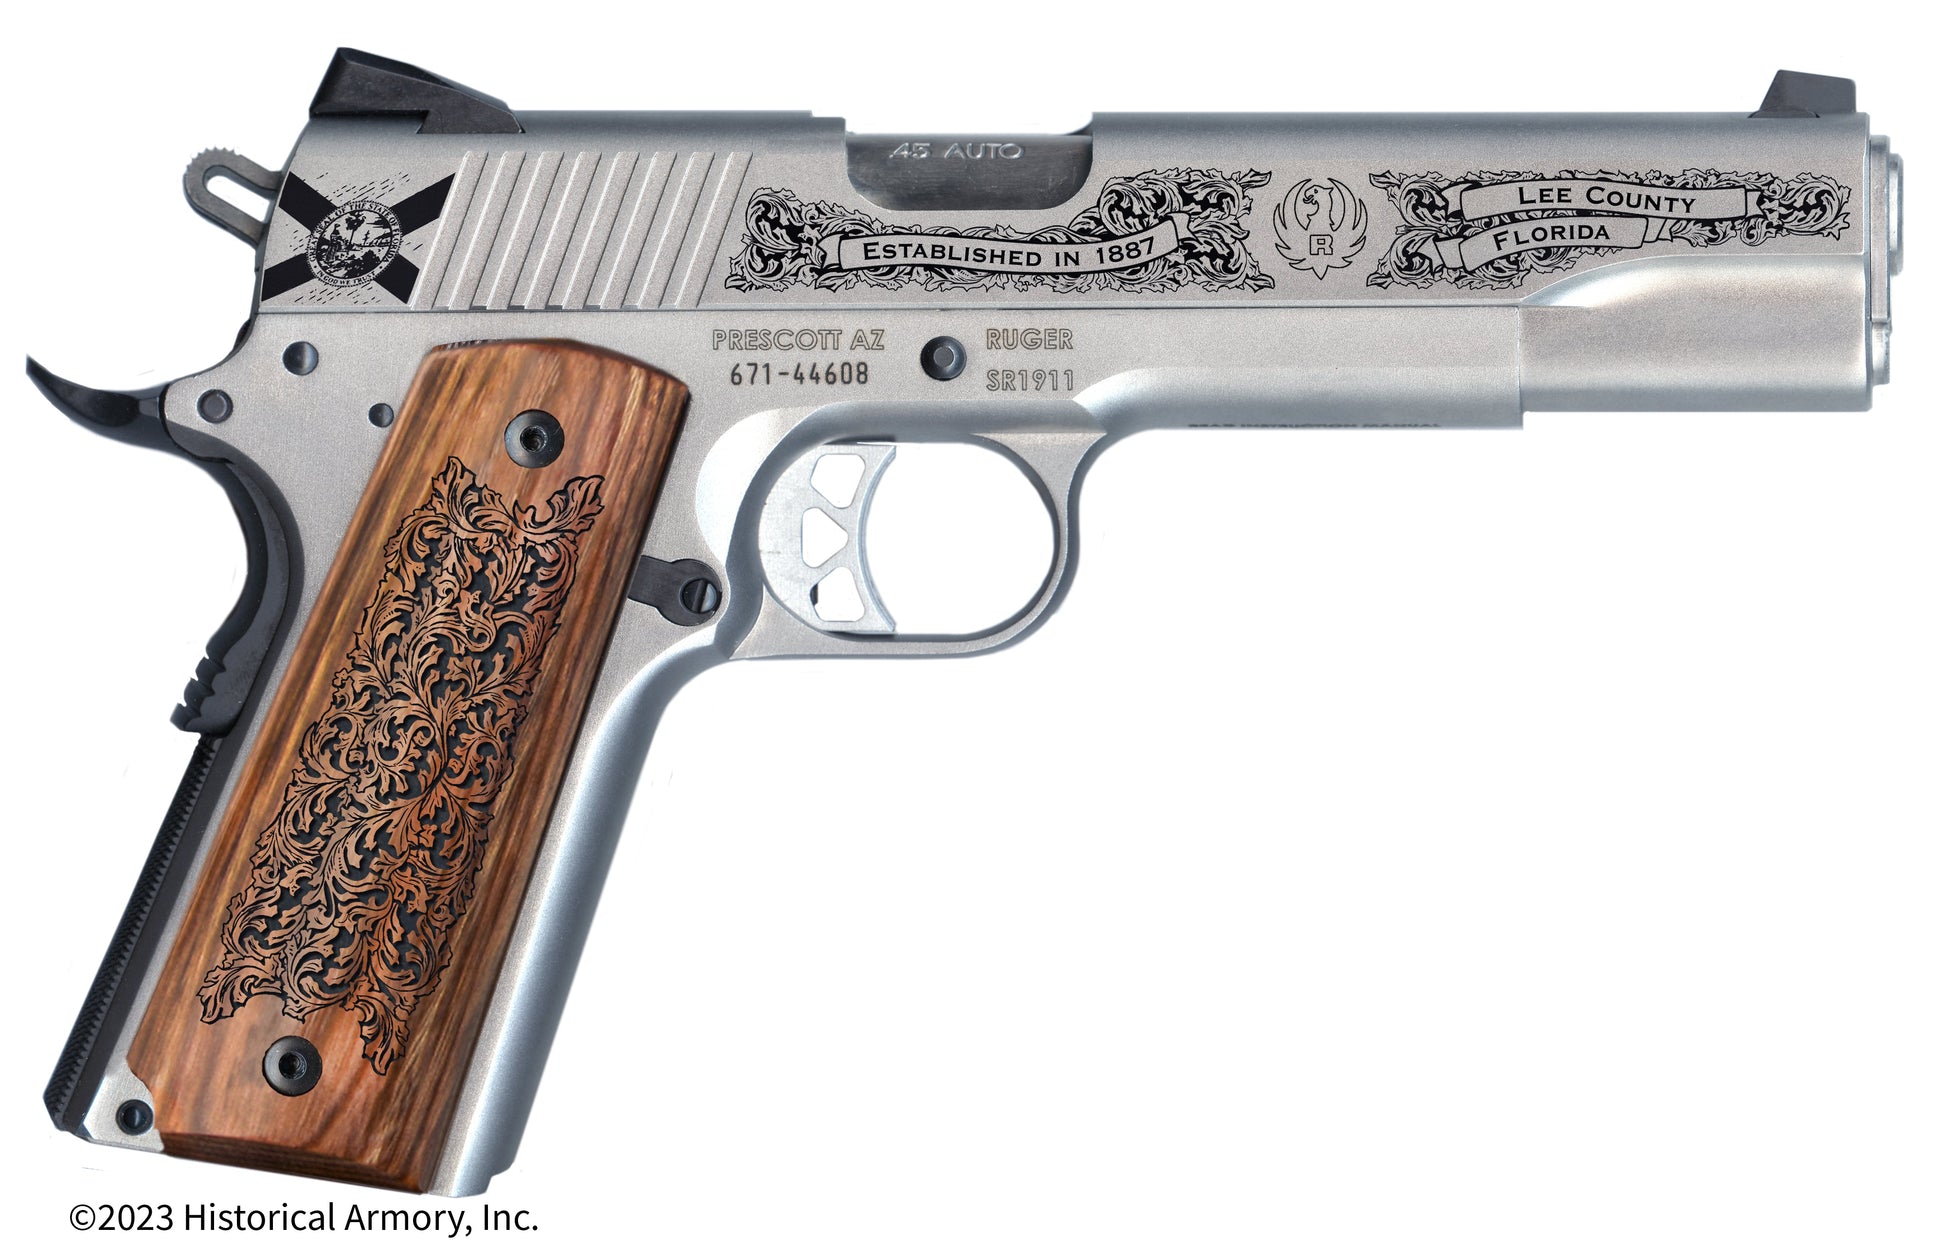 Lee County Florida Engraved .45 Auto Ruger 1911